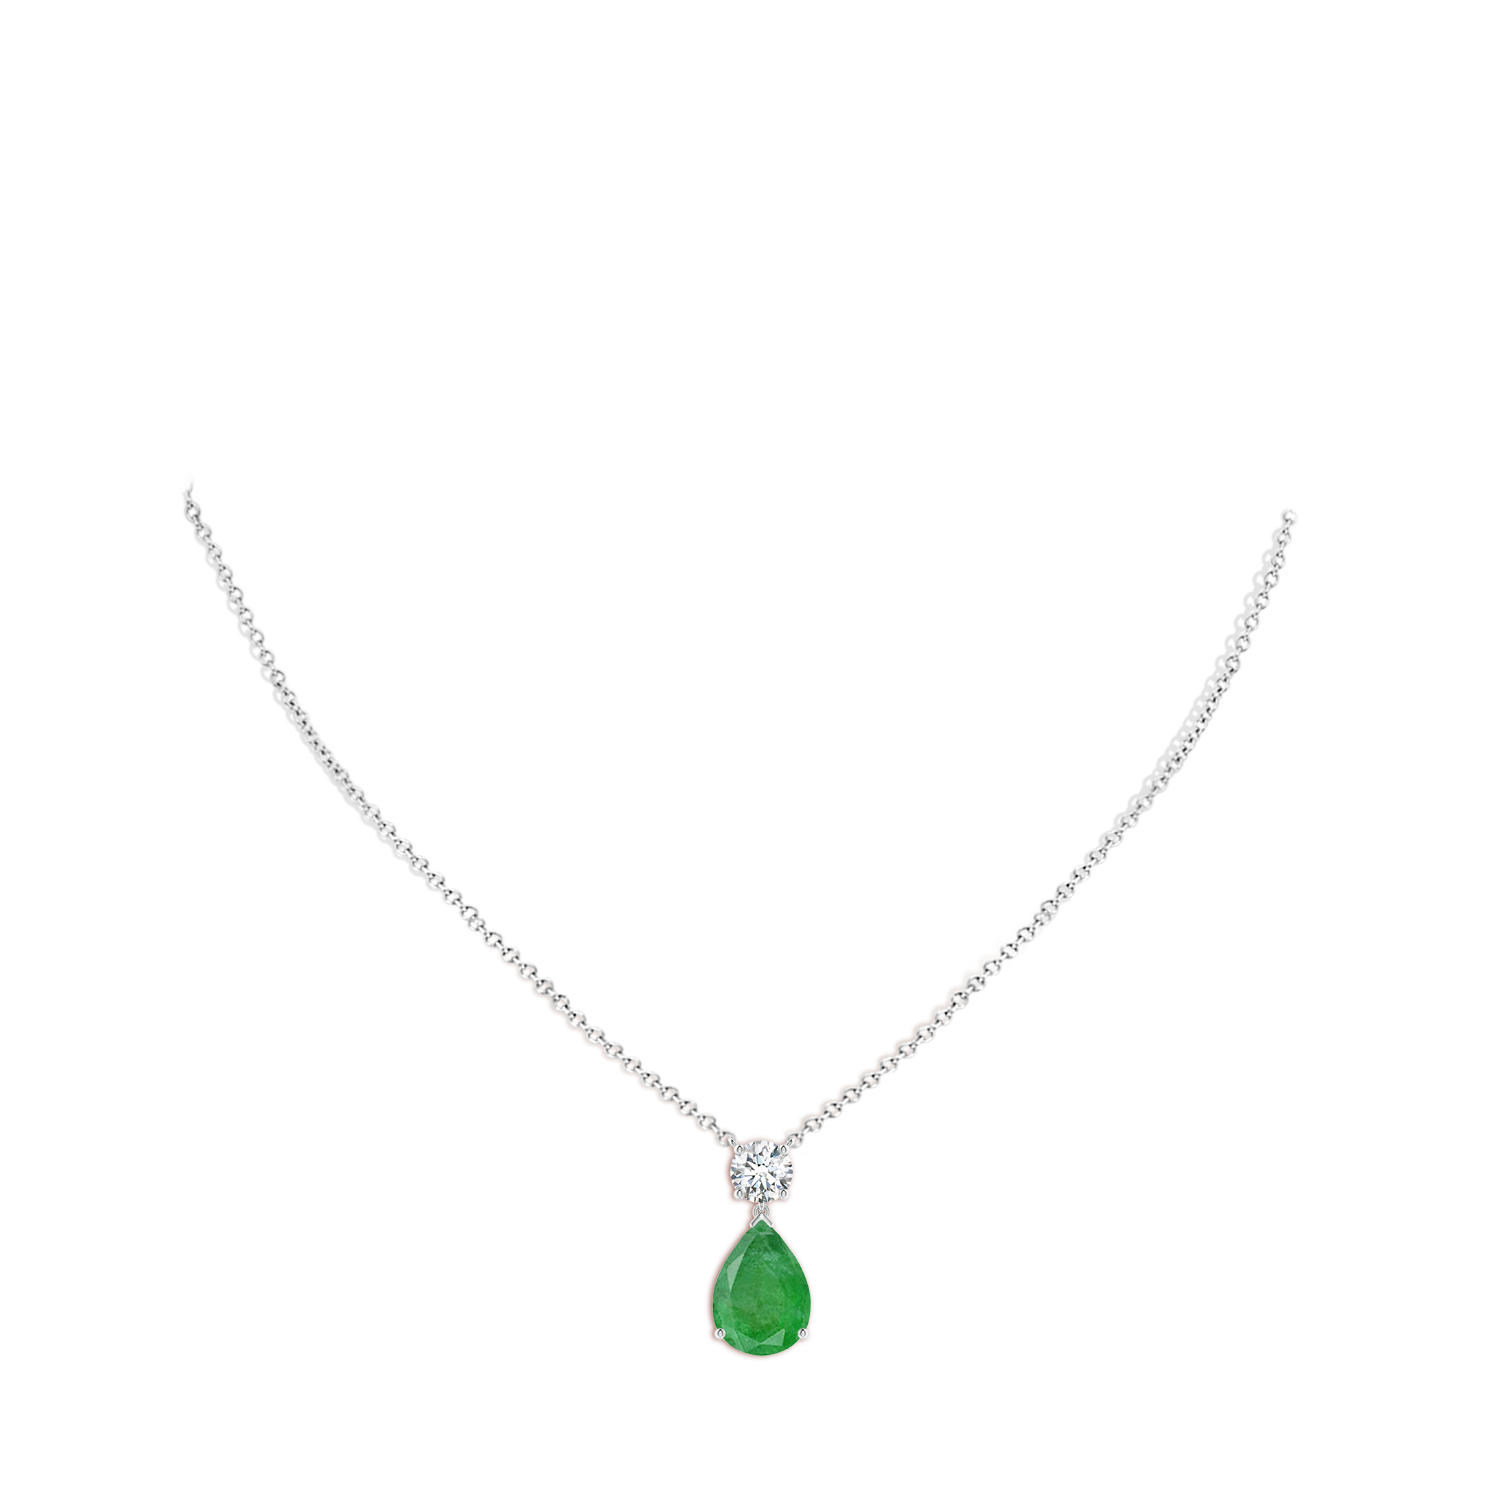 A - Emerald / 7.6 CT / 14 KT White Gold